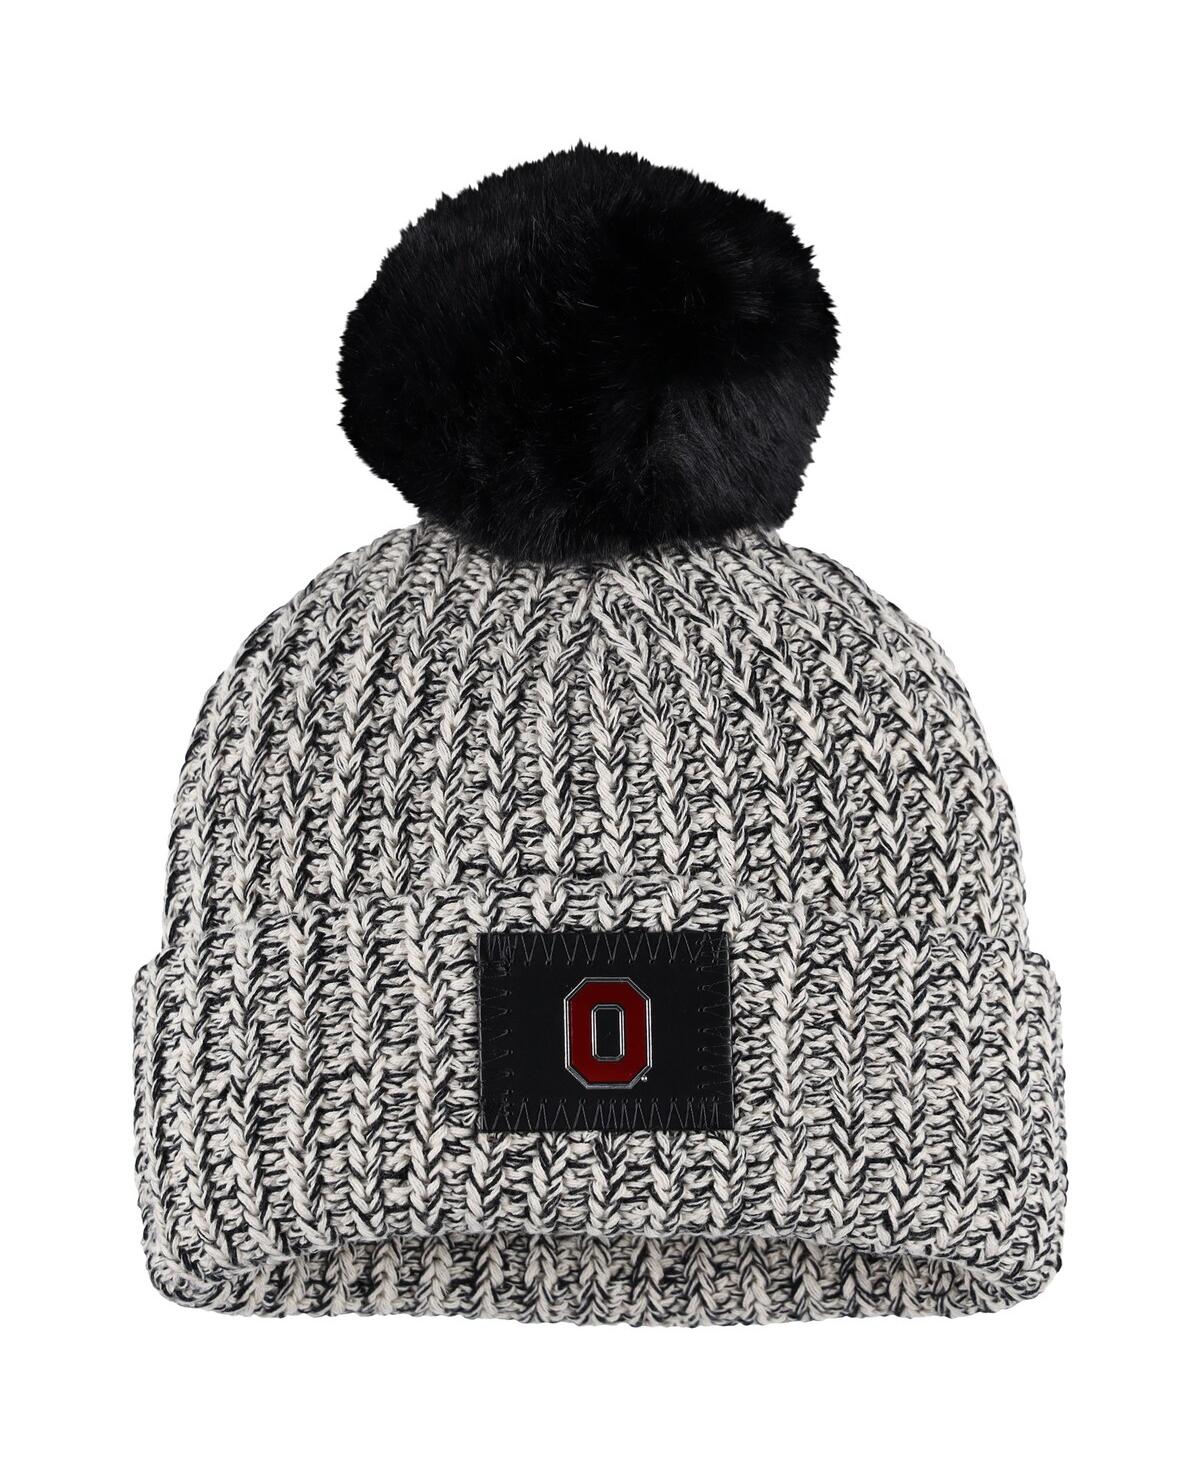 Women's Love Your Melon Gray Ohio State Buckeyes Cuffed Knit Hat with Pom - Gray